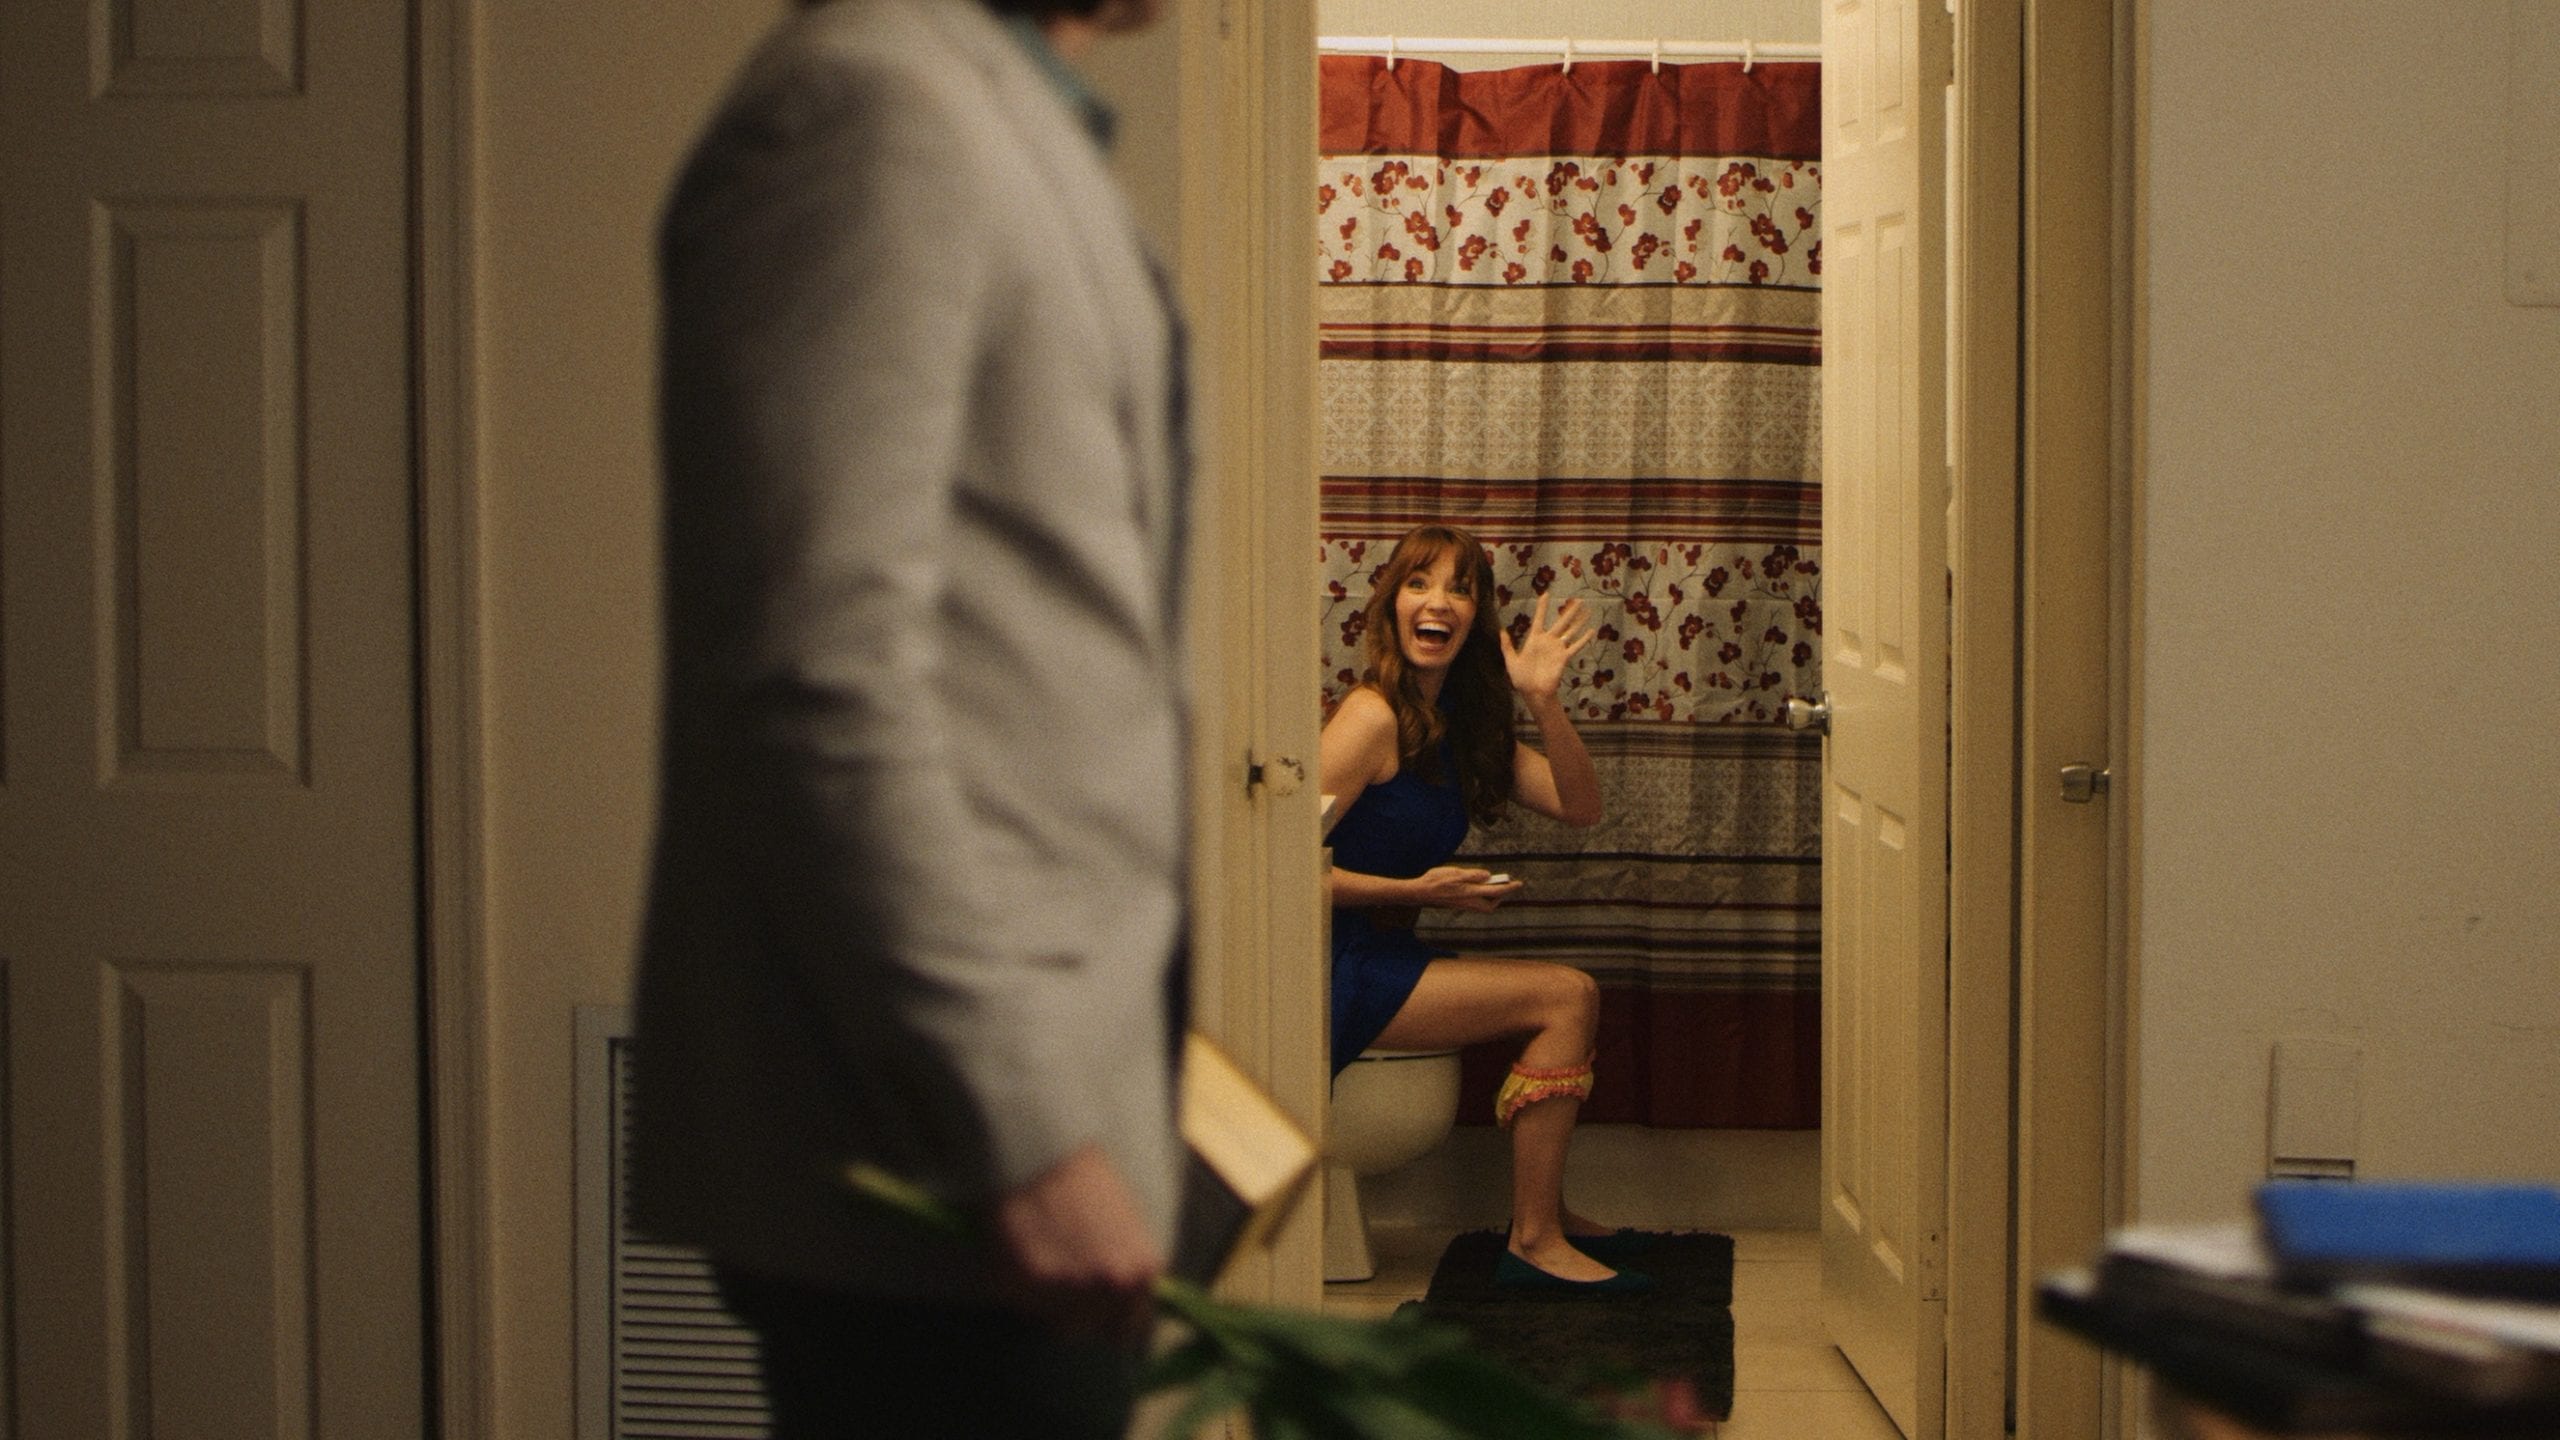 Man in a gray suit carrying a box of Whitman's Chocolates and flowers walking past a bathroom with a woman sitting on the toilet waving and smiling